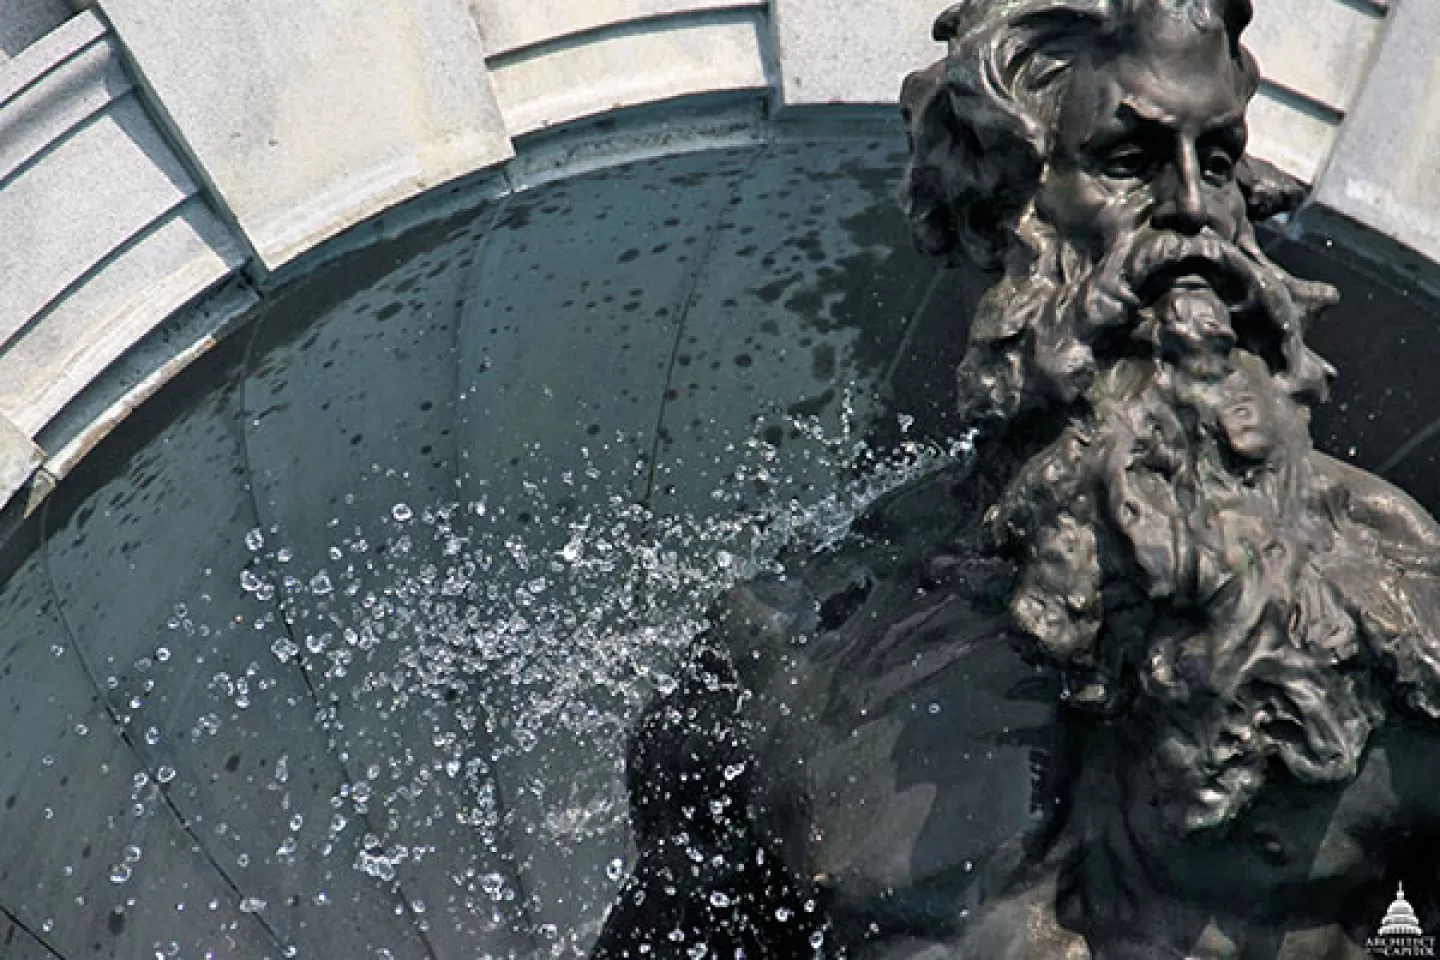 Detailed look at the Neptune sculpture element of the fountain at the Thomas Jefferson Building in Washington, D.C.